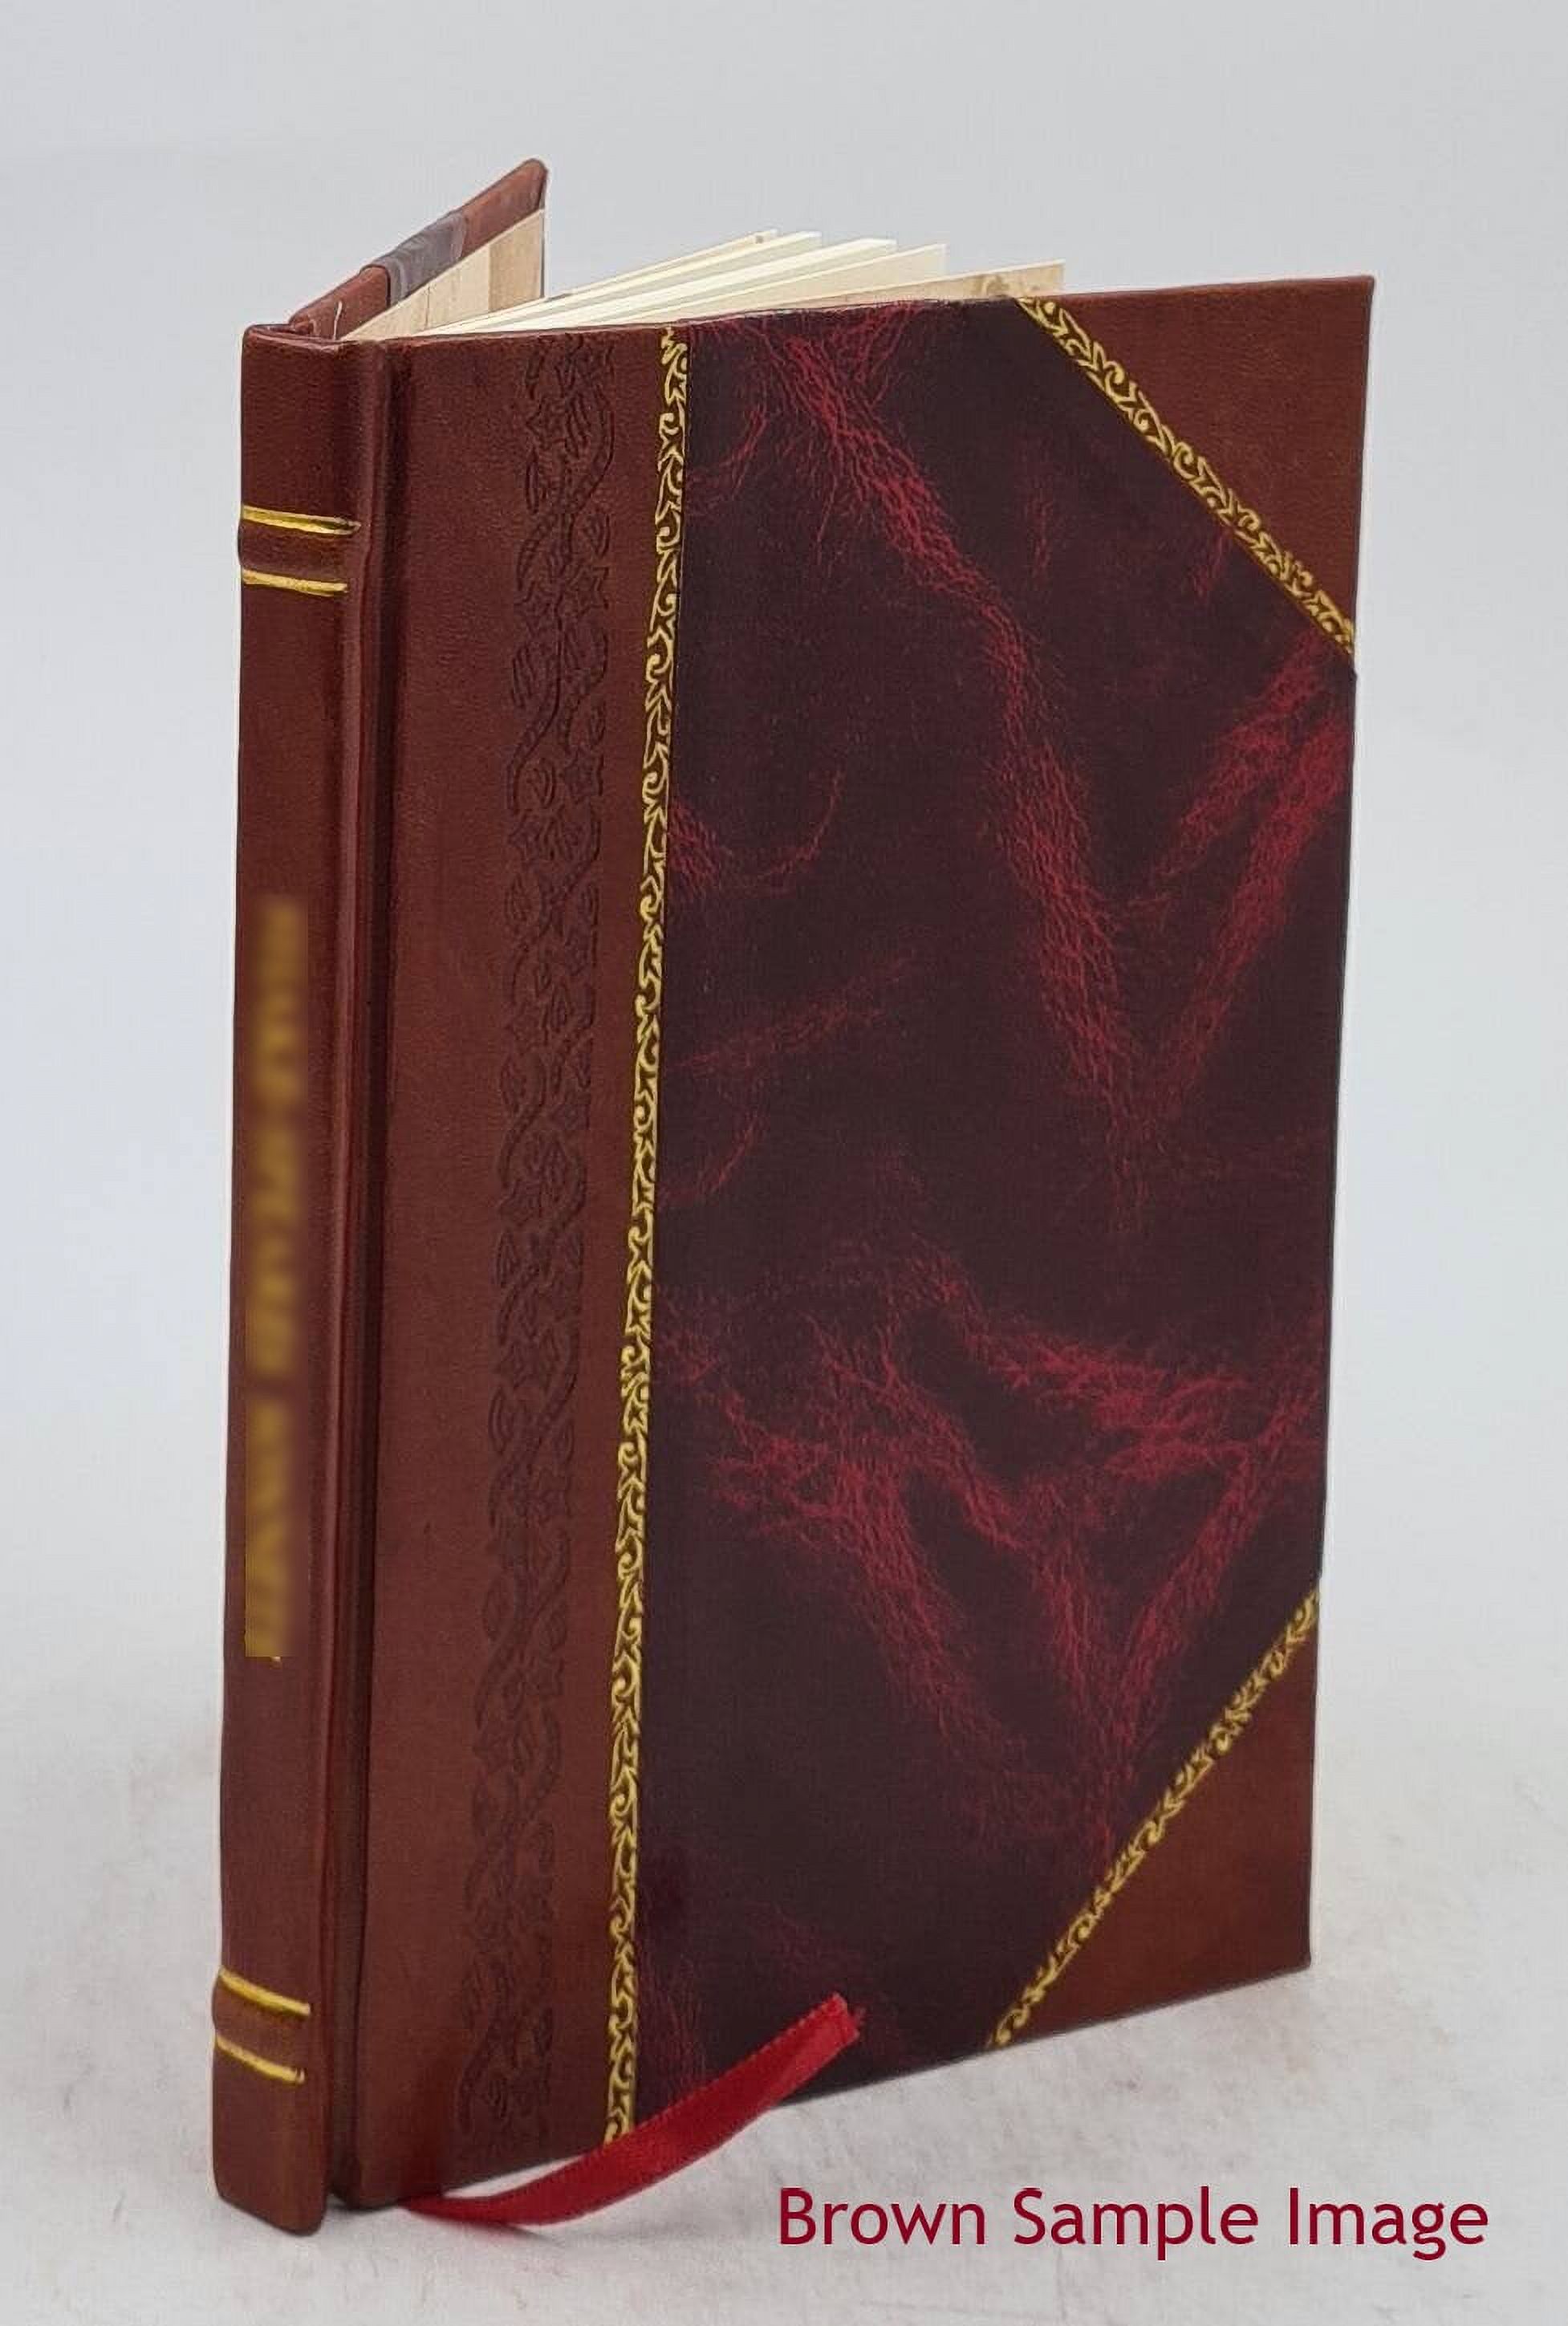 The rajah and principality of Mysore; with a letter to Lord Stanley 1865 [Leather Bound] - image 1 of 5